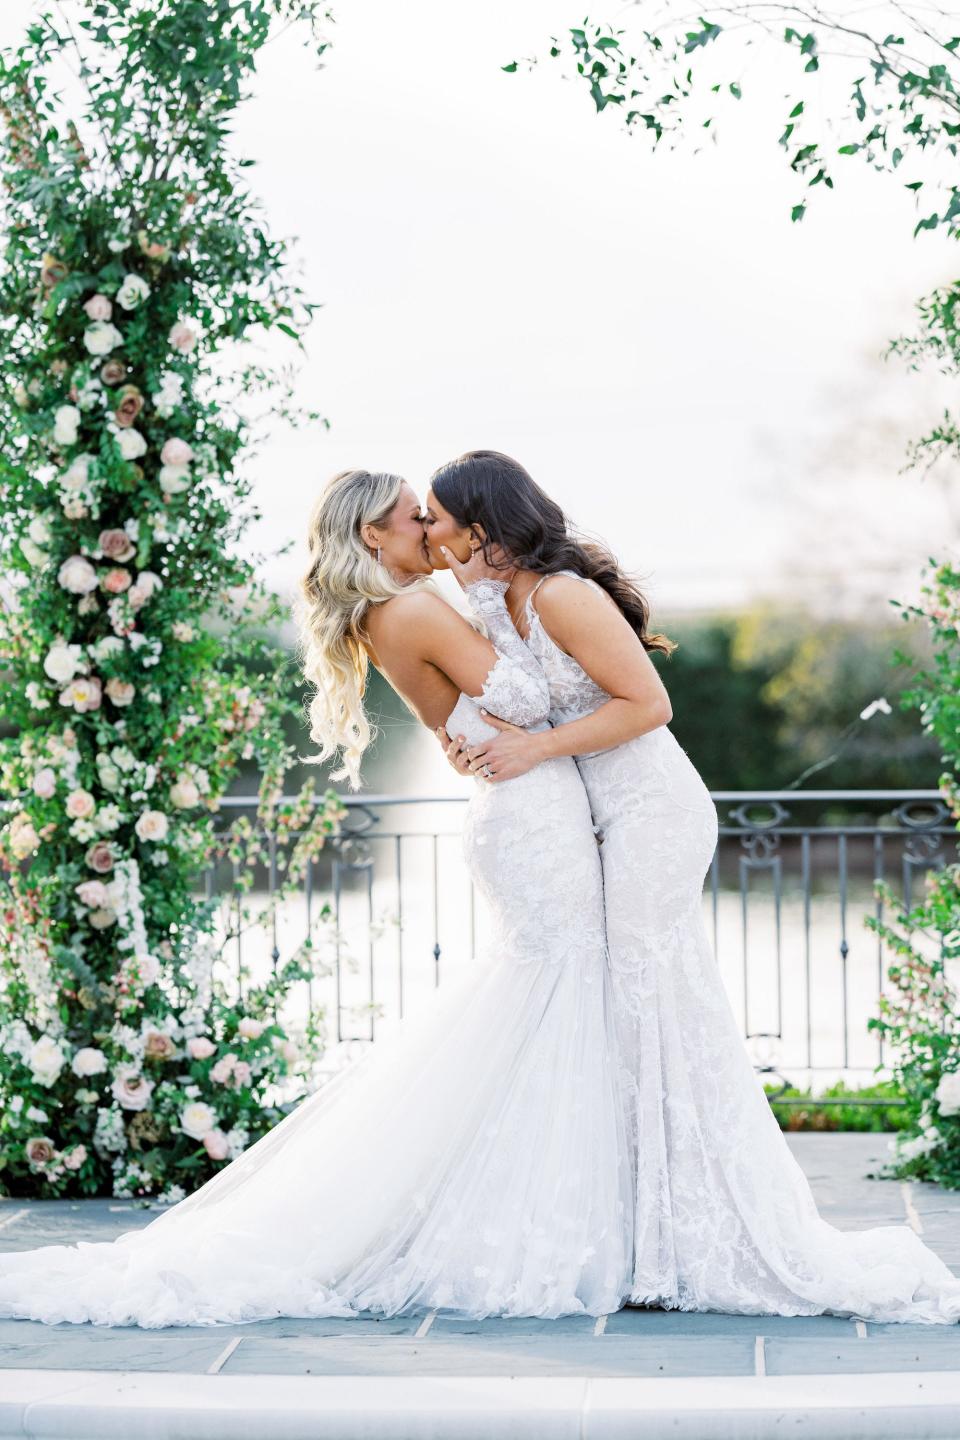 Two brides kiss under a floral archway.